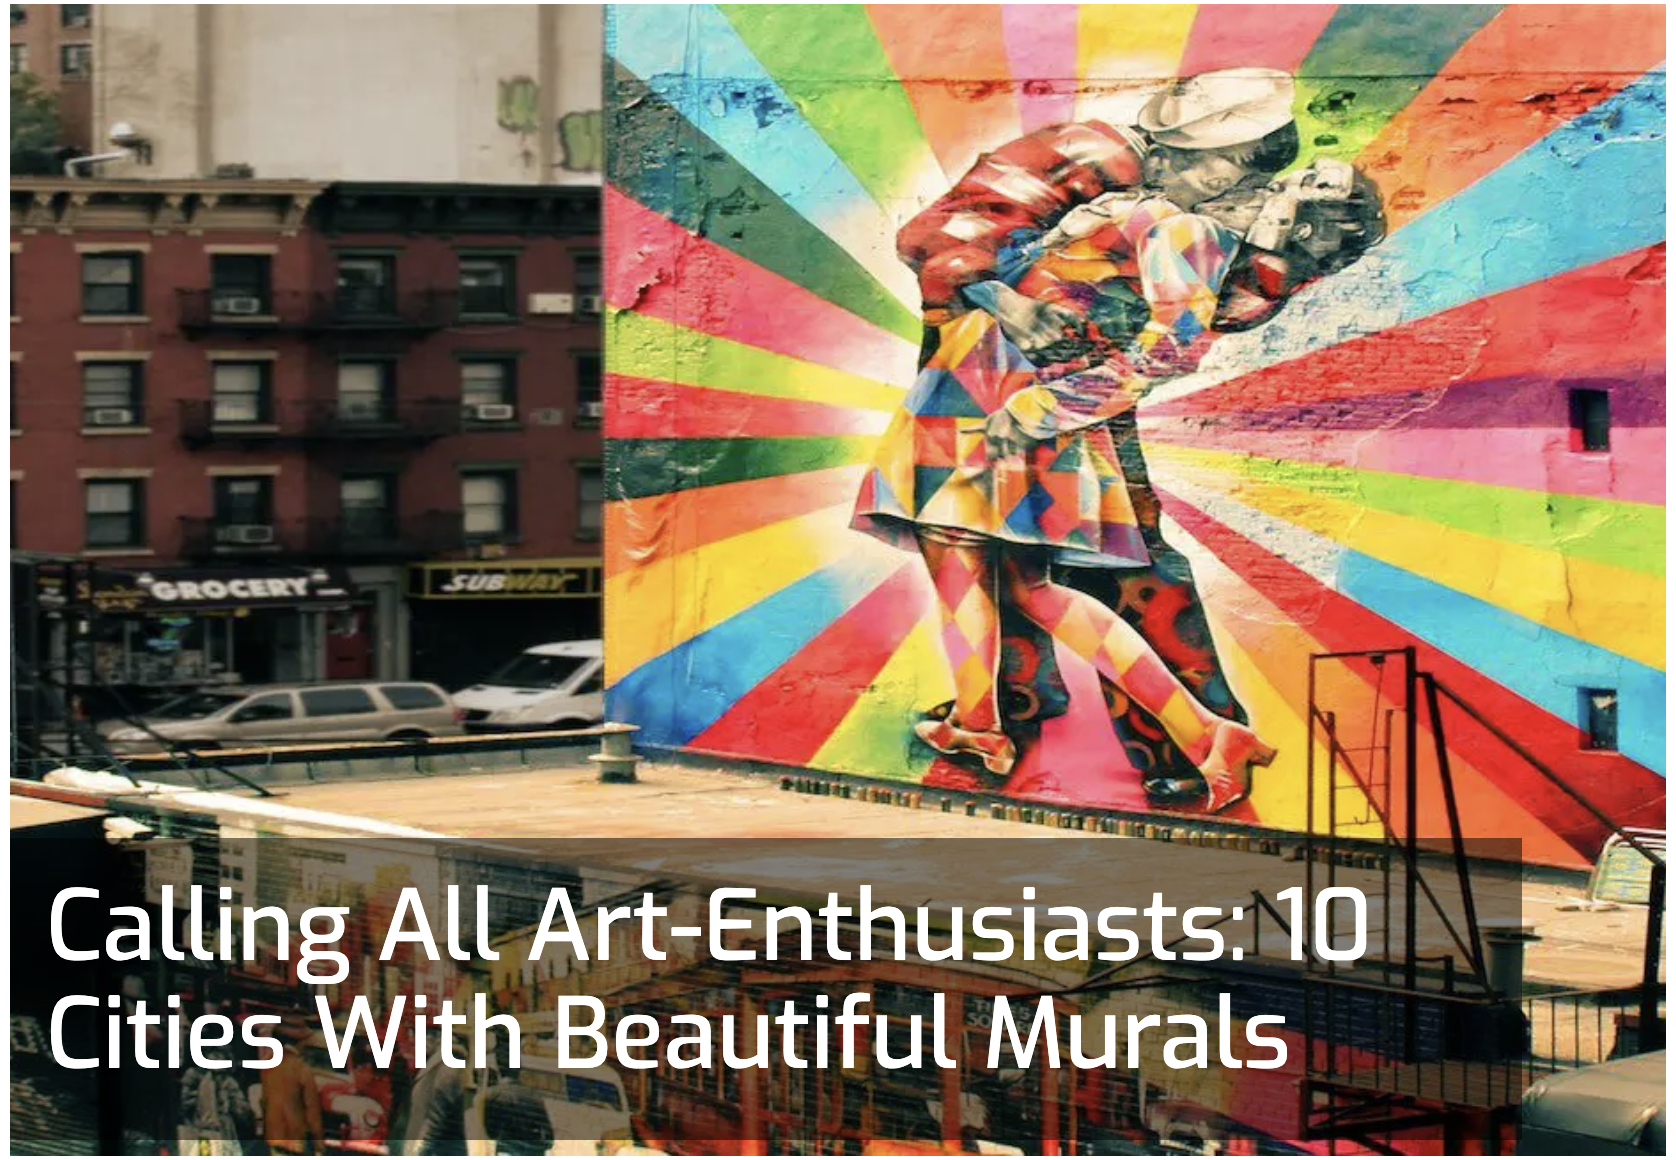 Calling All Art-Enthusiasts: 10 Cities With Beautiful Murals by Charlsie Niemiec